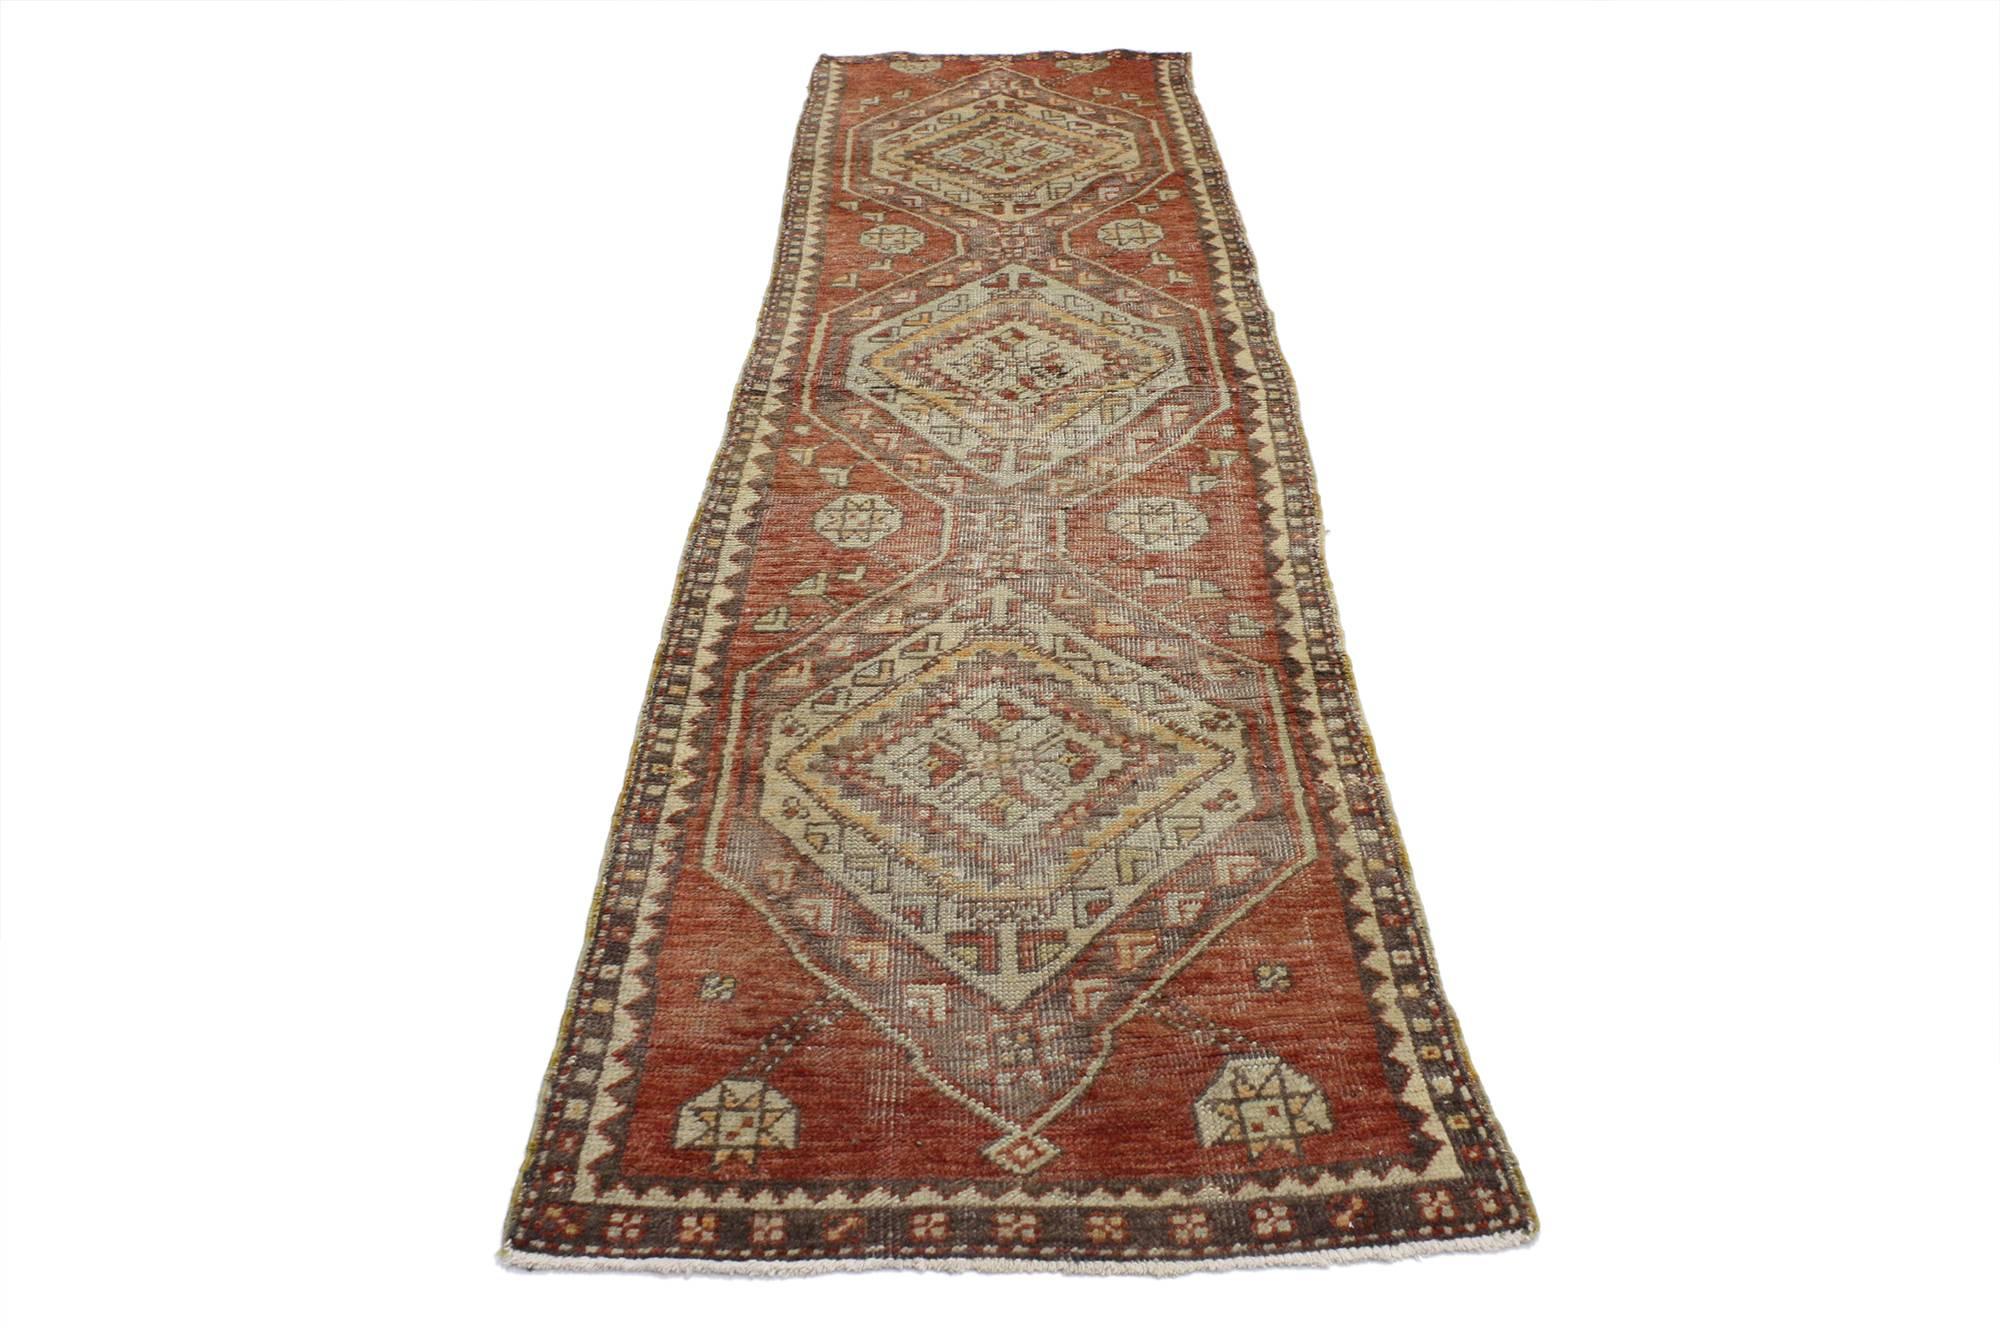 52087, vintage Turkish Oushak runner, narrow hallway runner. This hand knotted wool vintage Turkish Oushak runner features three connected hexagonal pole medallions spread across an abrashed brick red field. Superimposed concentric diamonds with